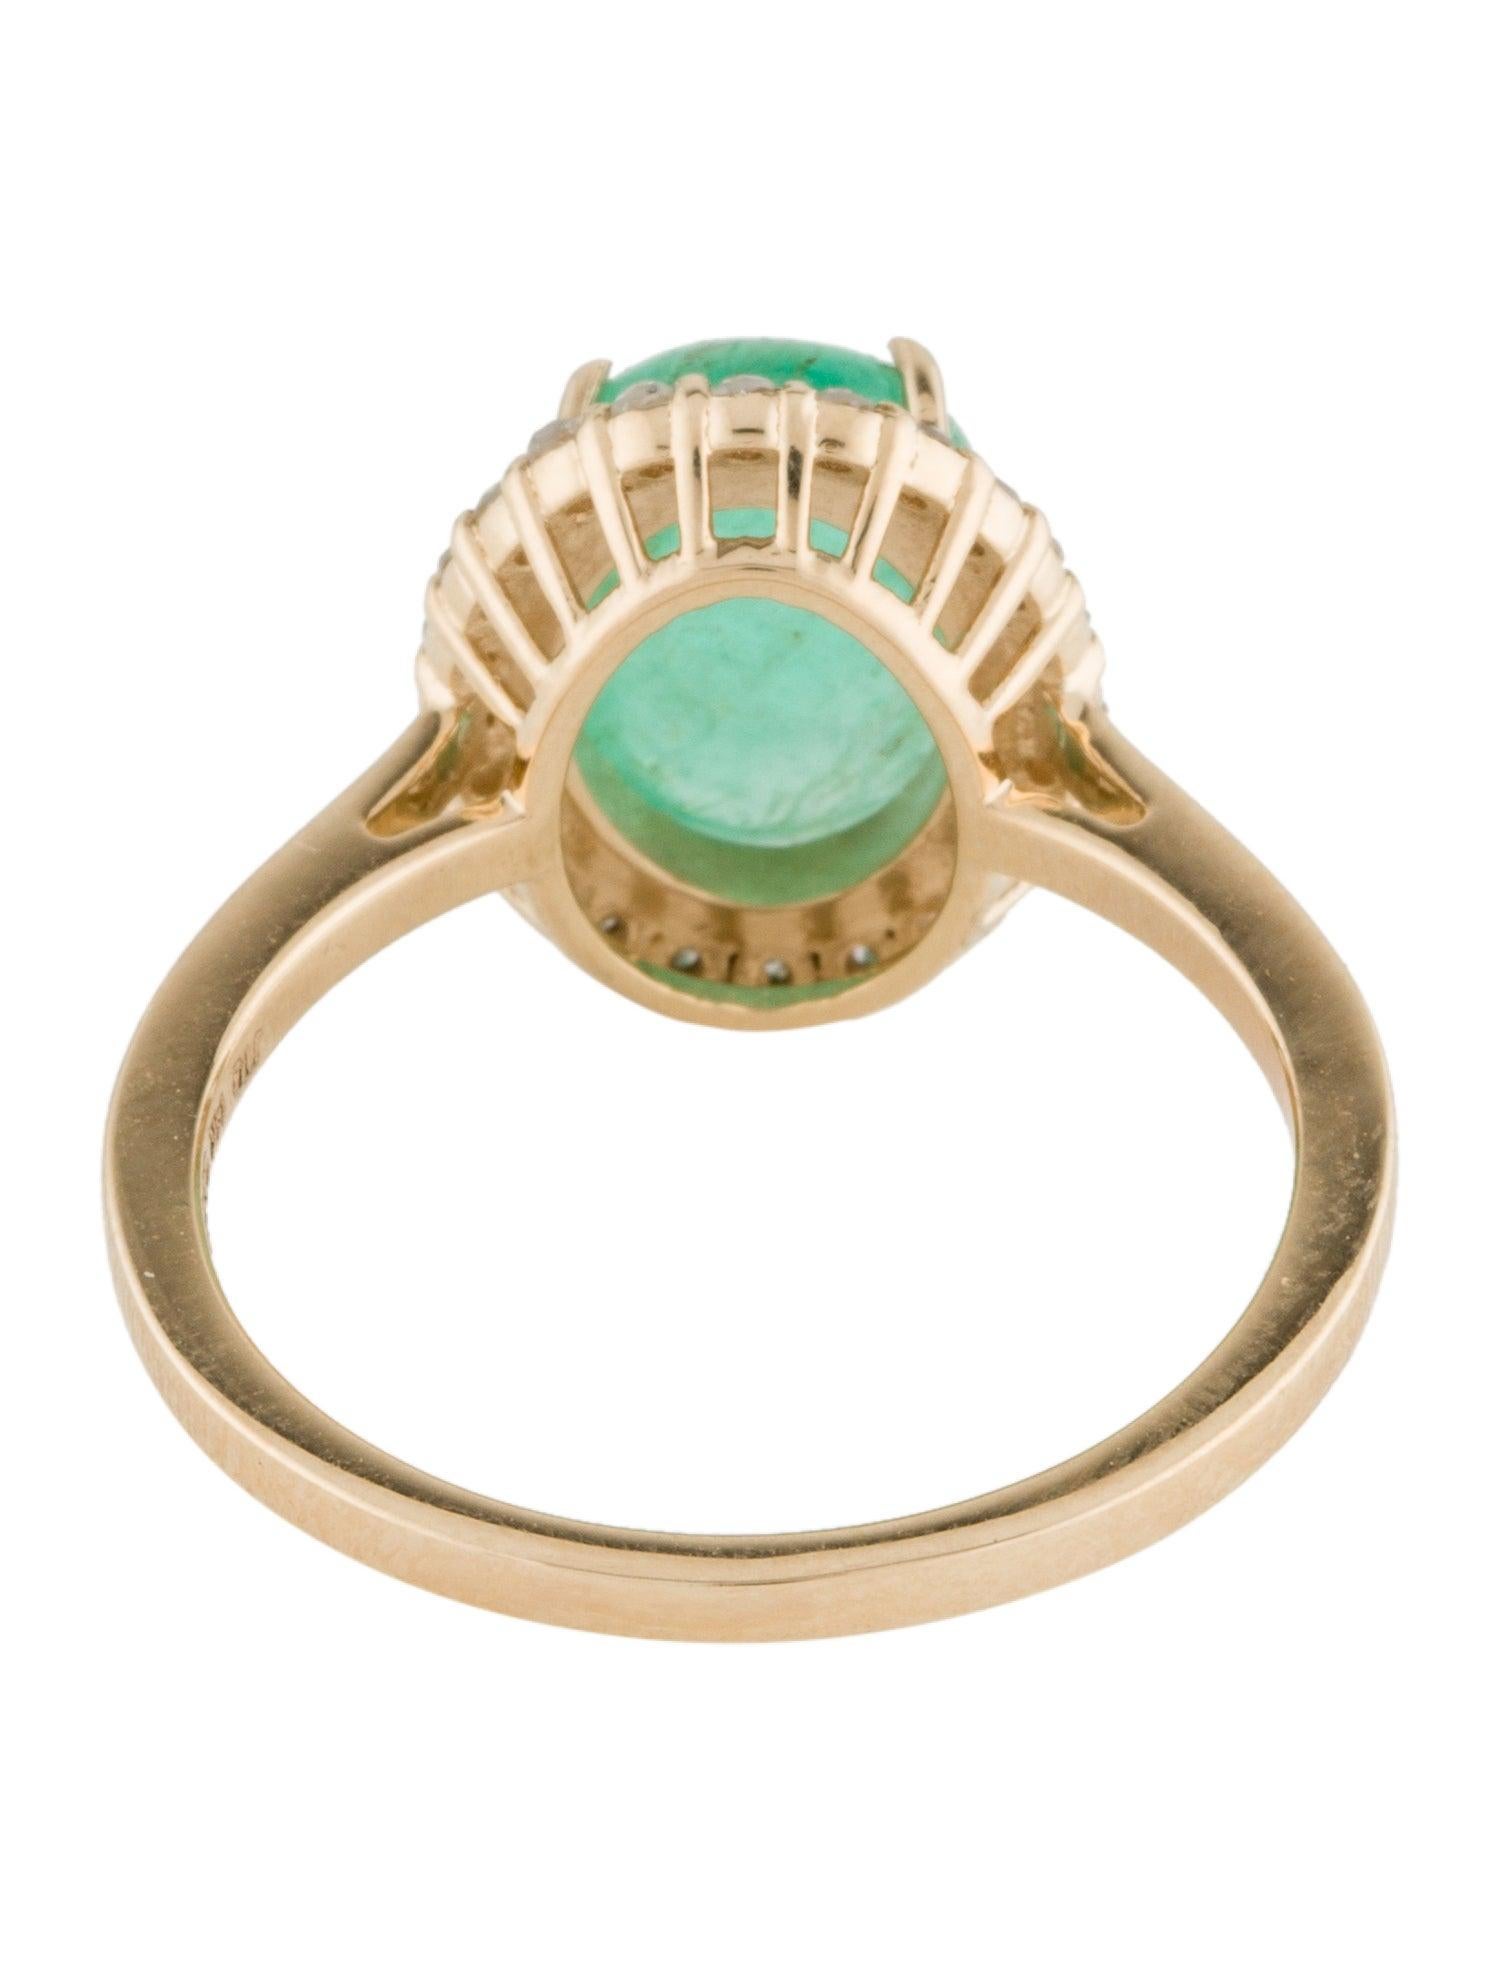 Brilliant Cut Luxurious 14K Emerald & Diamond Cocktail Ring - 3.59ct Gemstone - Size 6.75 For Sale